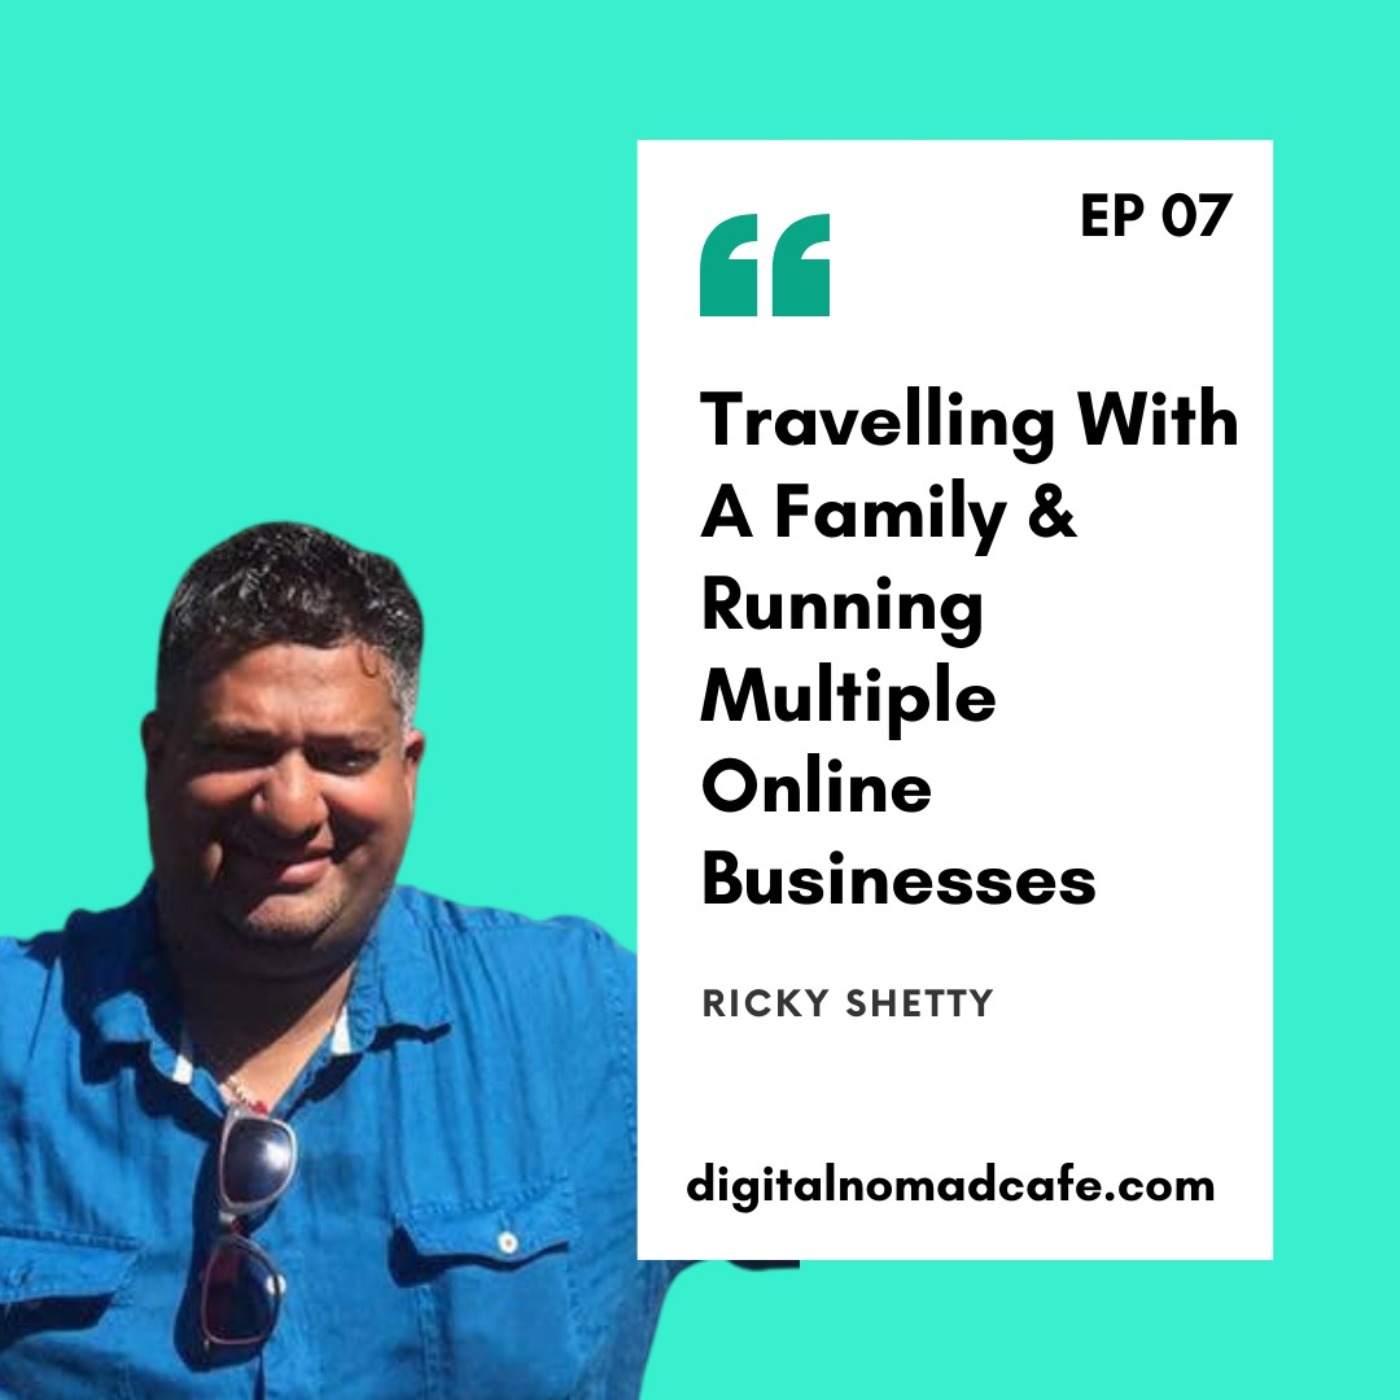 EP07: Travelling With A Family & Running Multiple Online Businesses With Ricky Shetty of DigitalNomadMastery.com